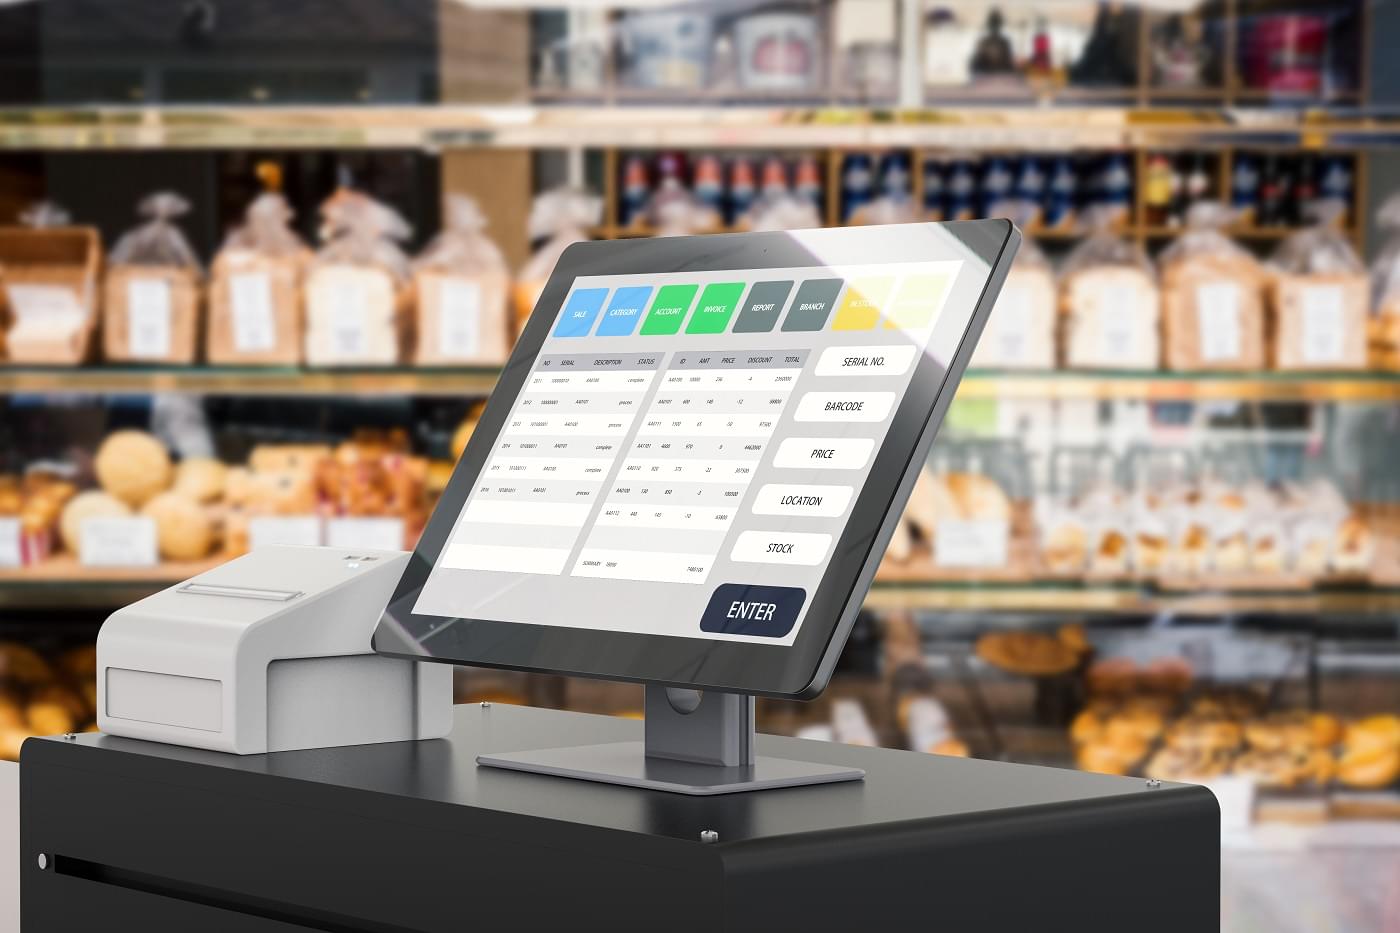 Image of point of sale system for store management.